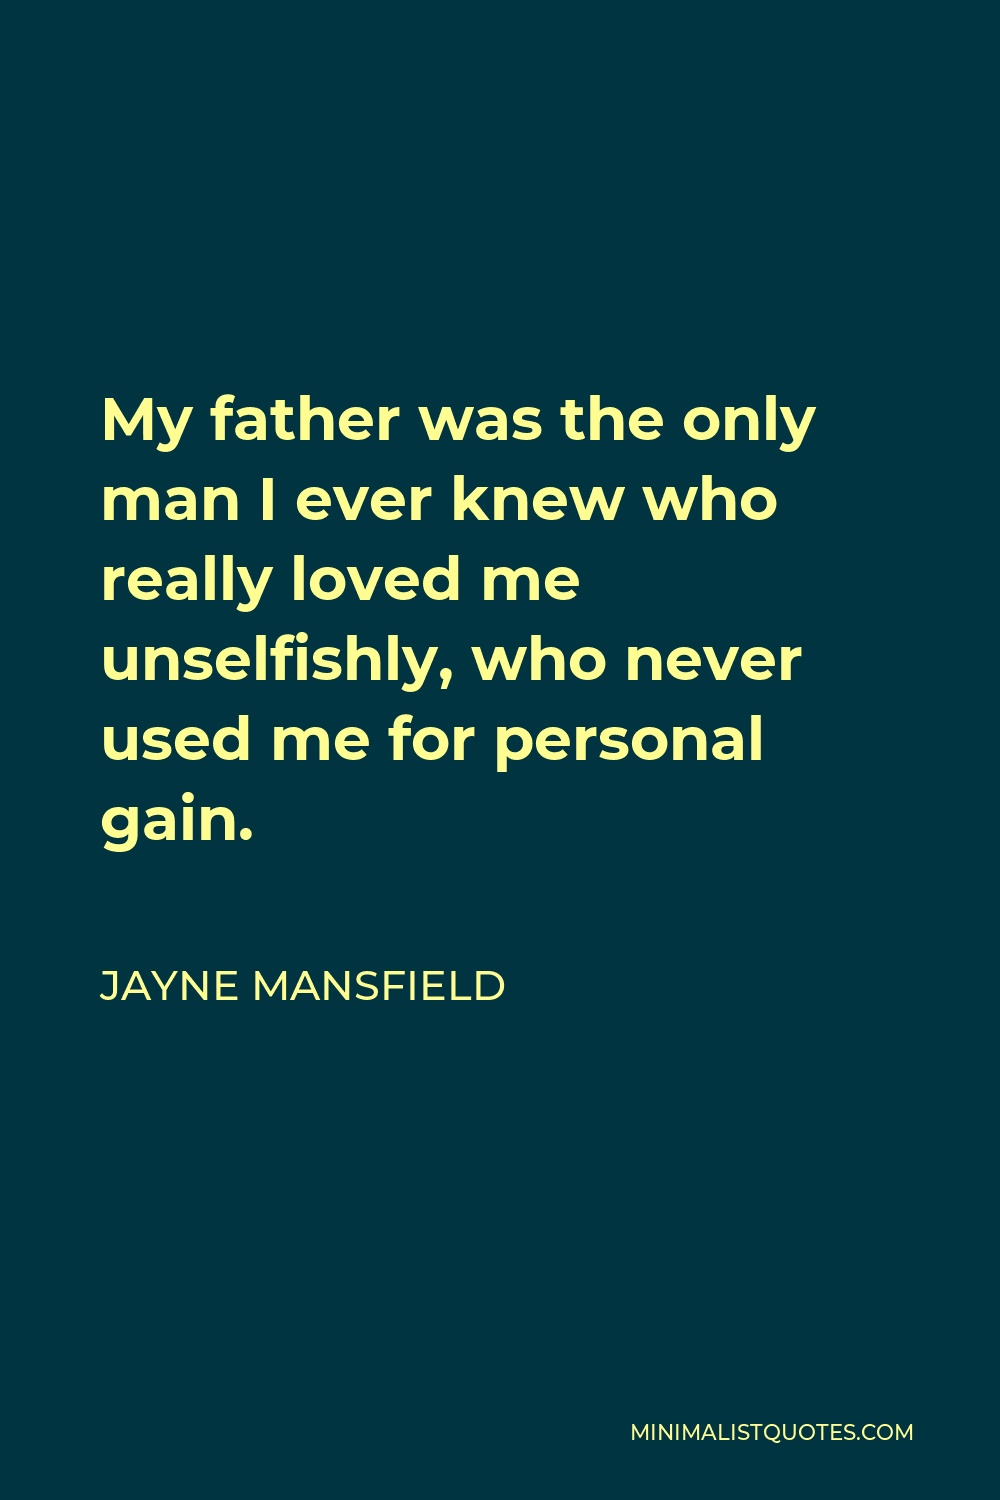 Jayne Mansfield Quote - My father was the only man I ever knew who really loved me unselfishly, who never used me for personal gain.